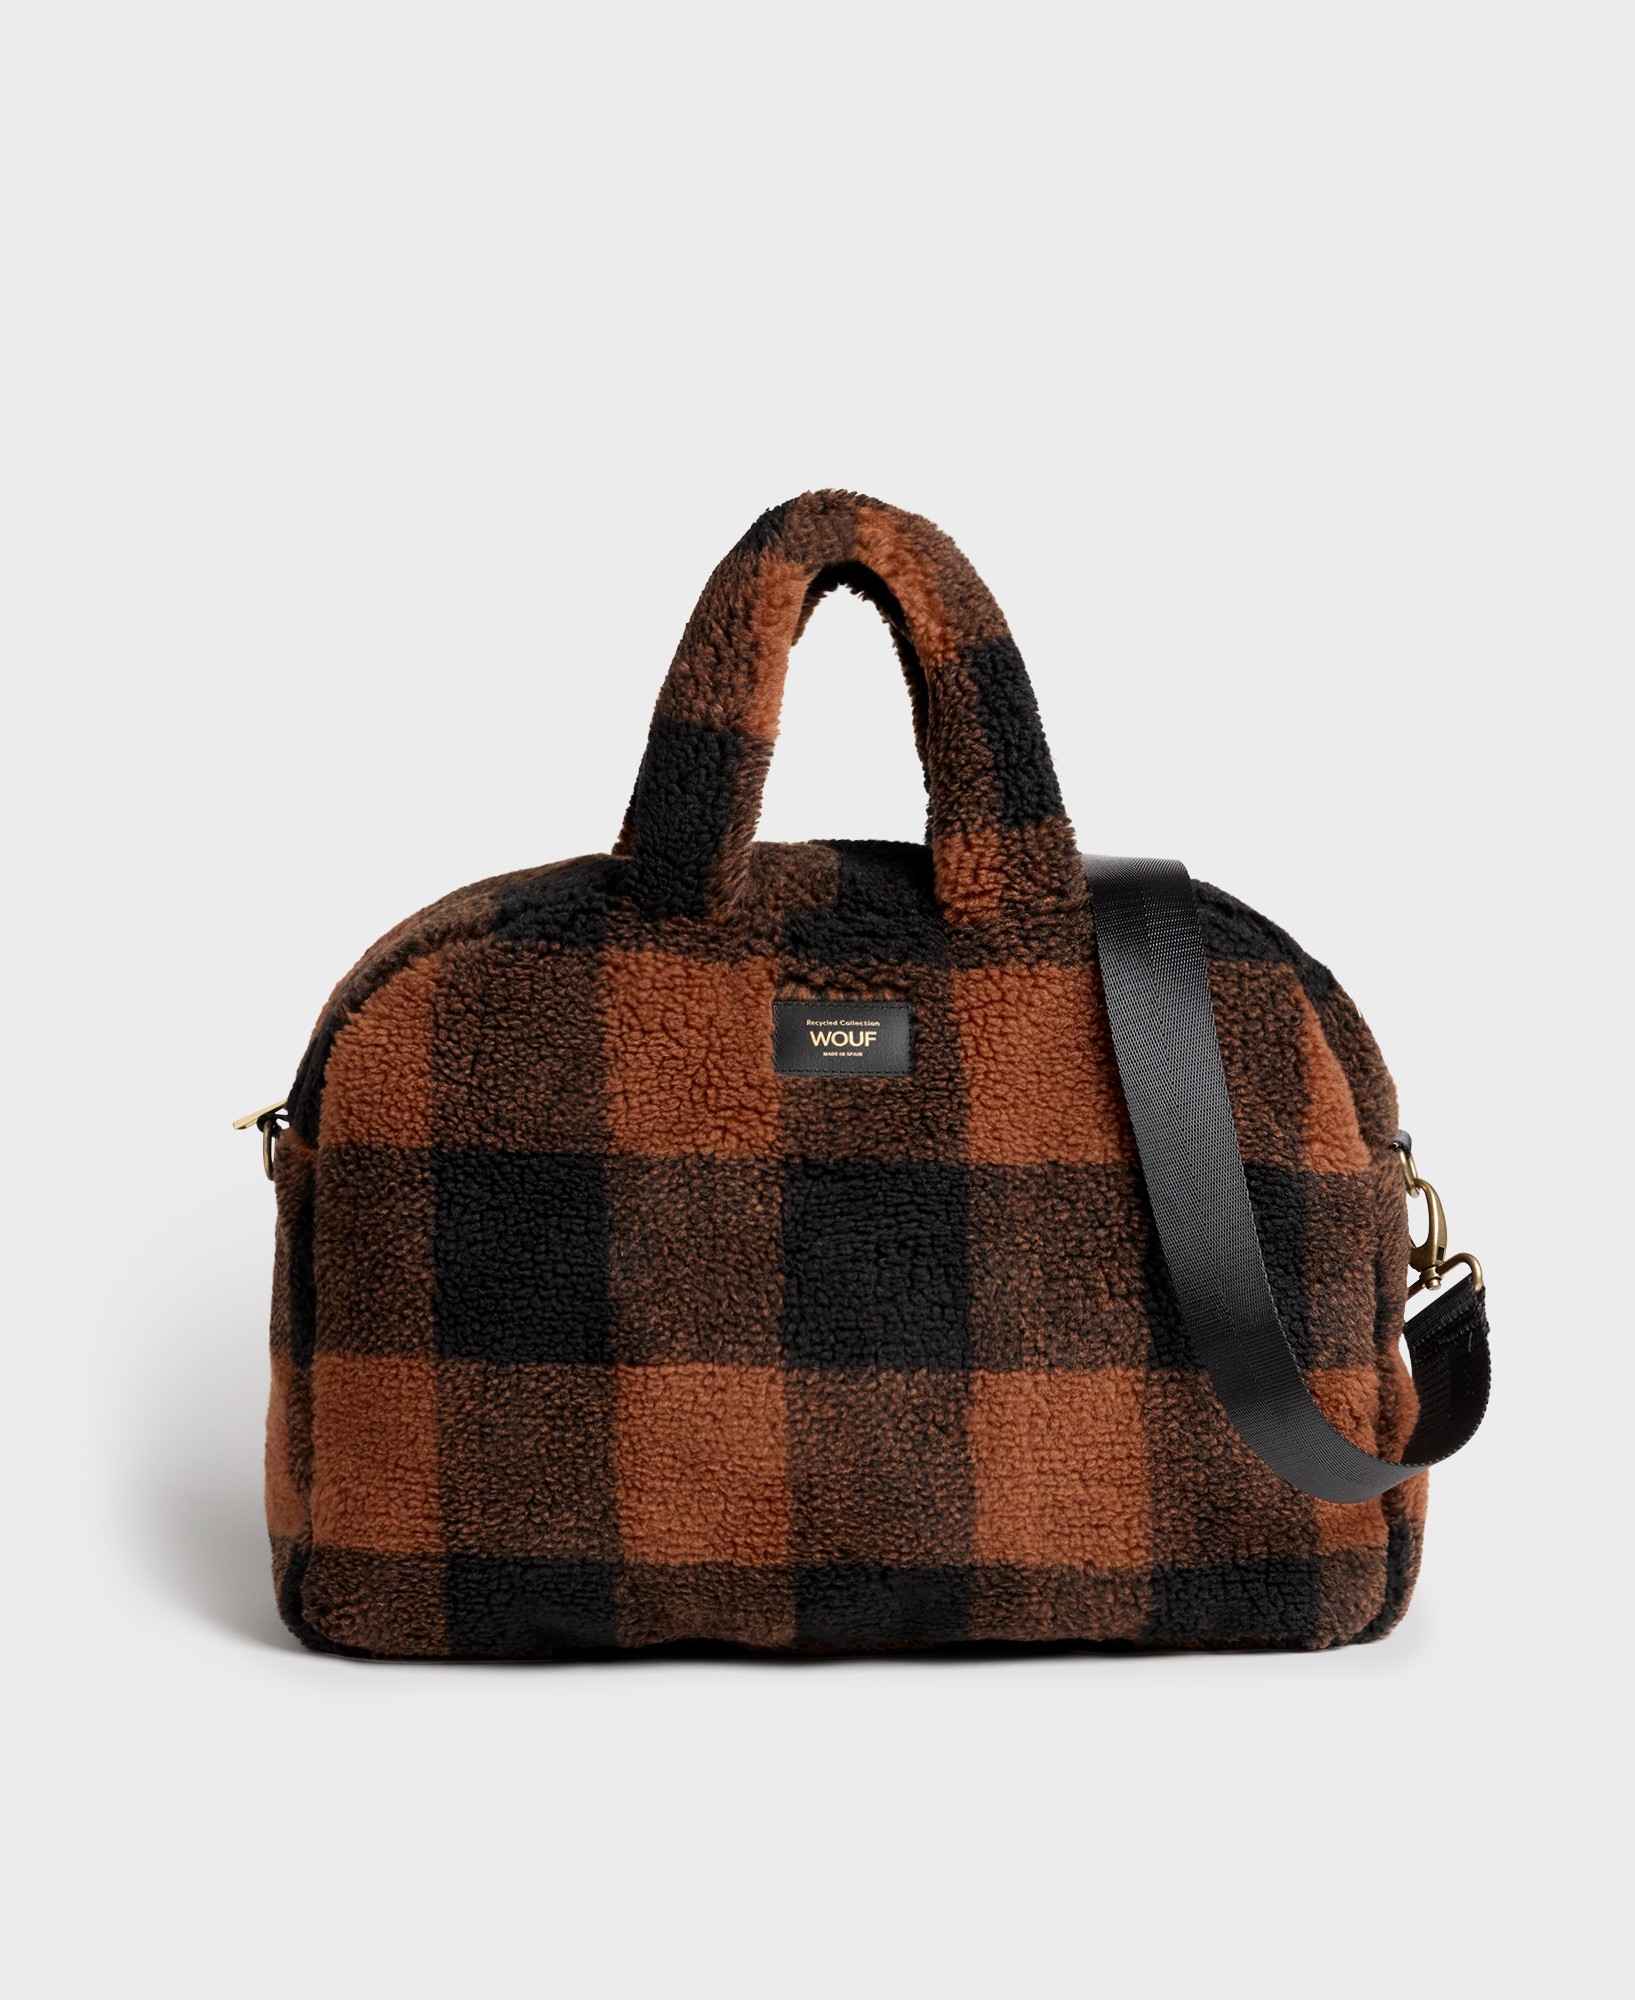 https://images.logicommerce.cloud/92/products/WOUF-TWB230039-Weekend-Bag-Brownie-Front_l.jpg